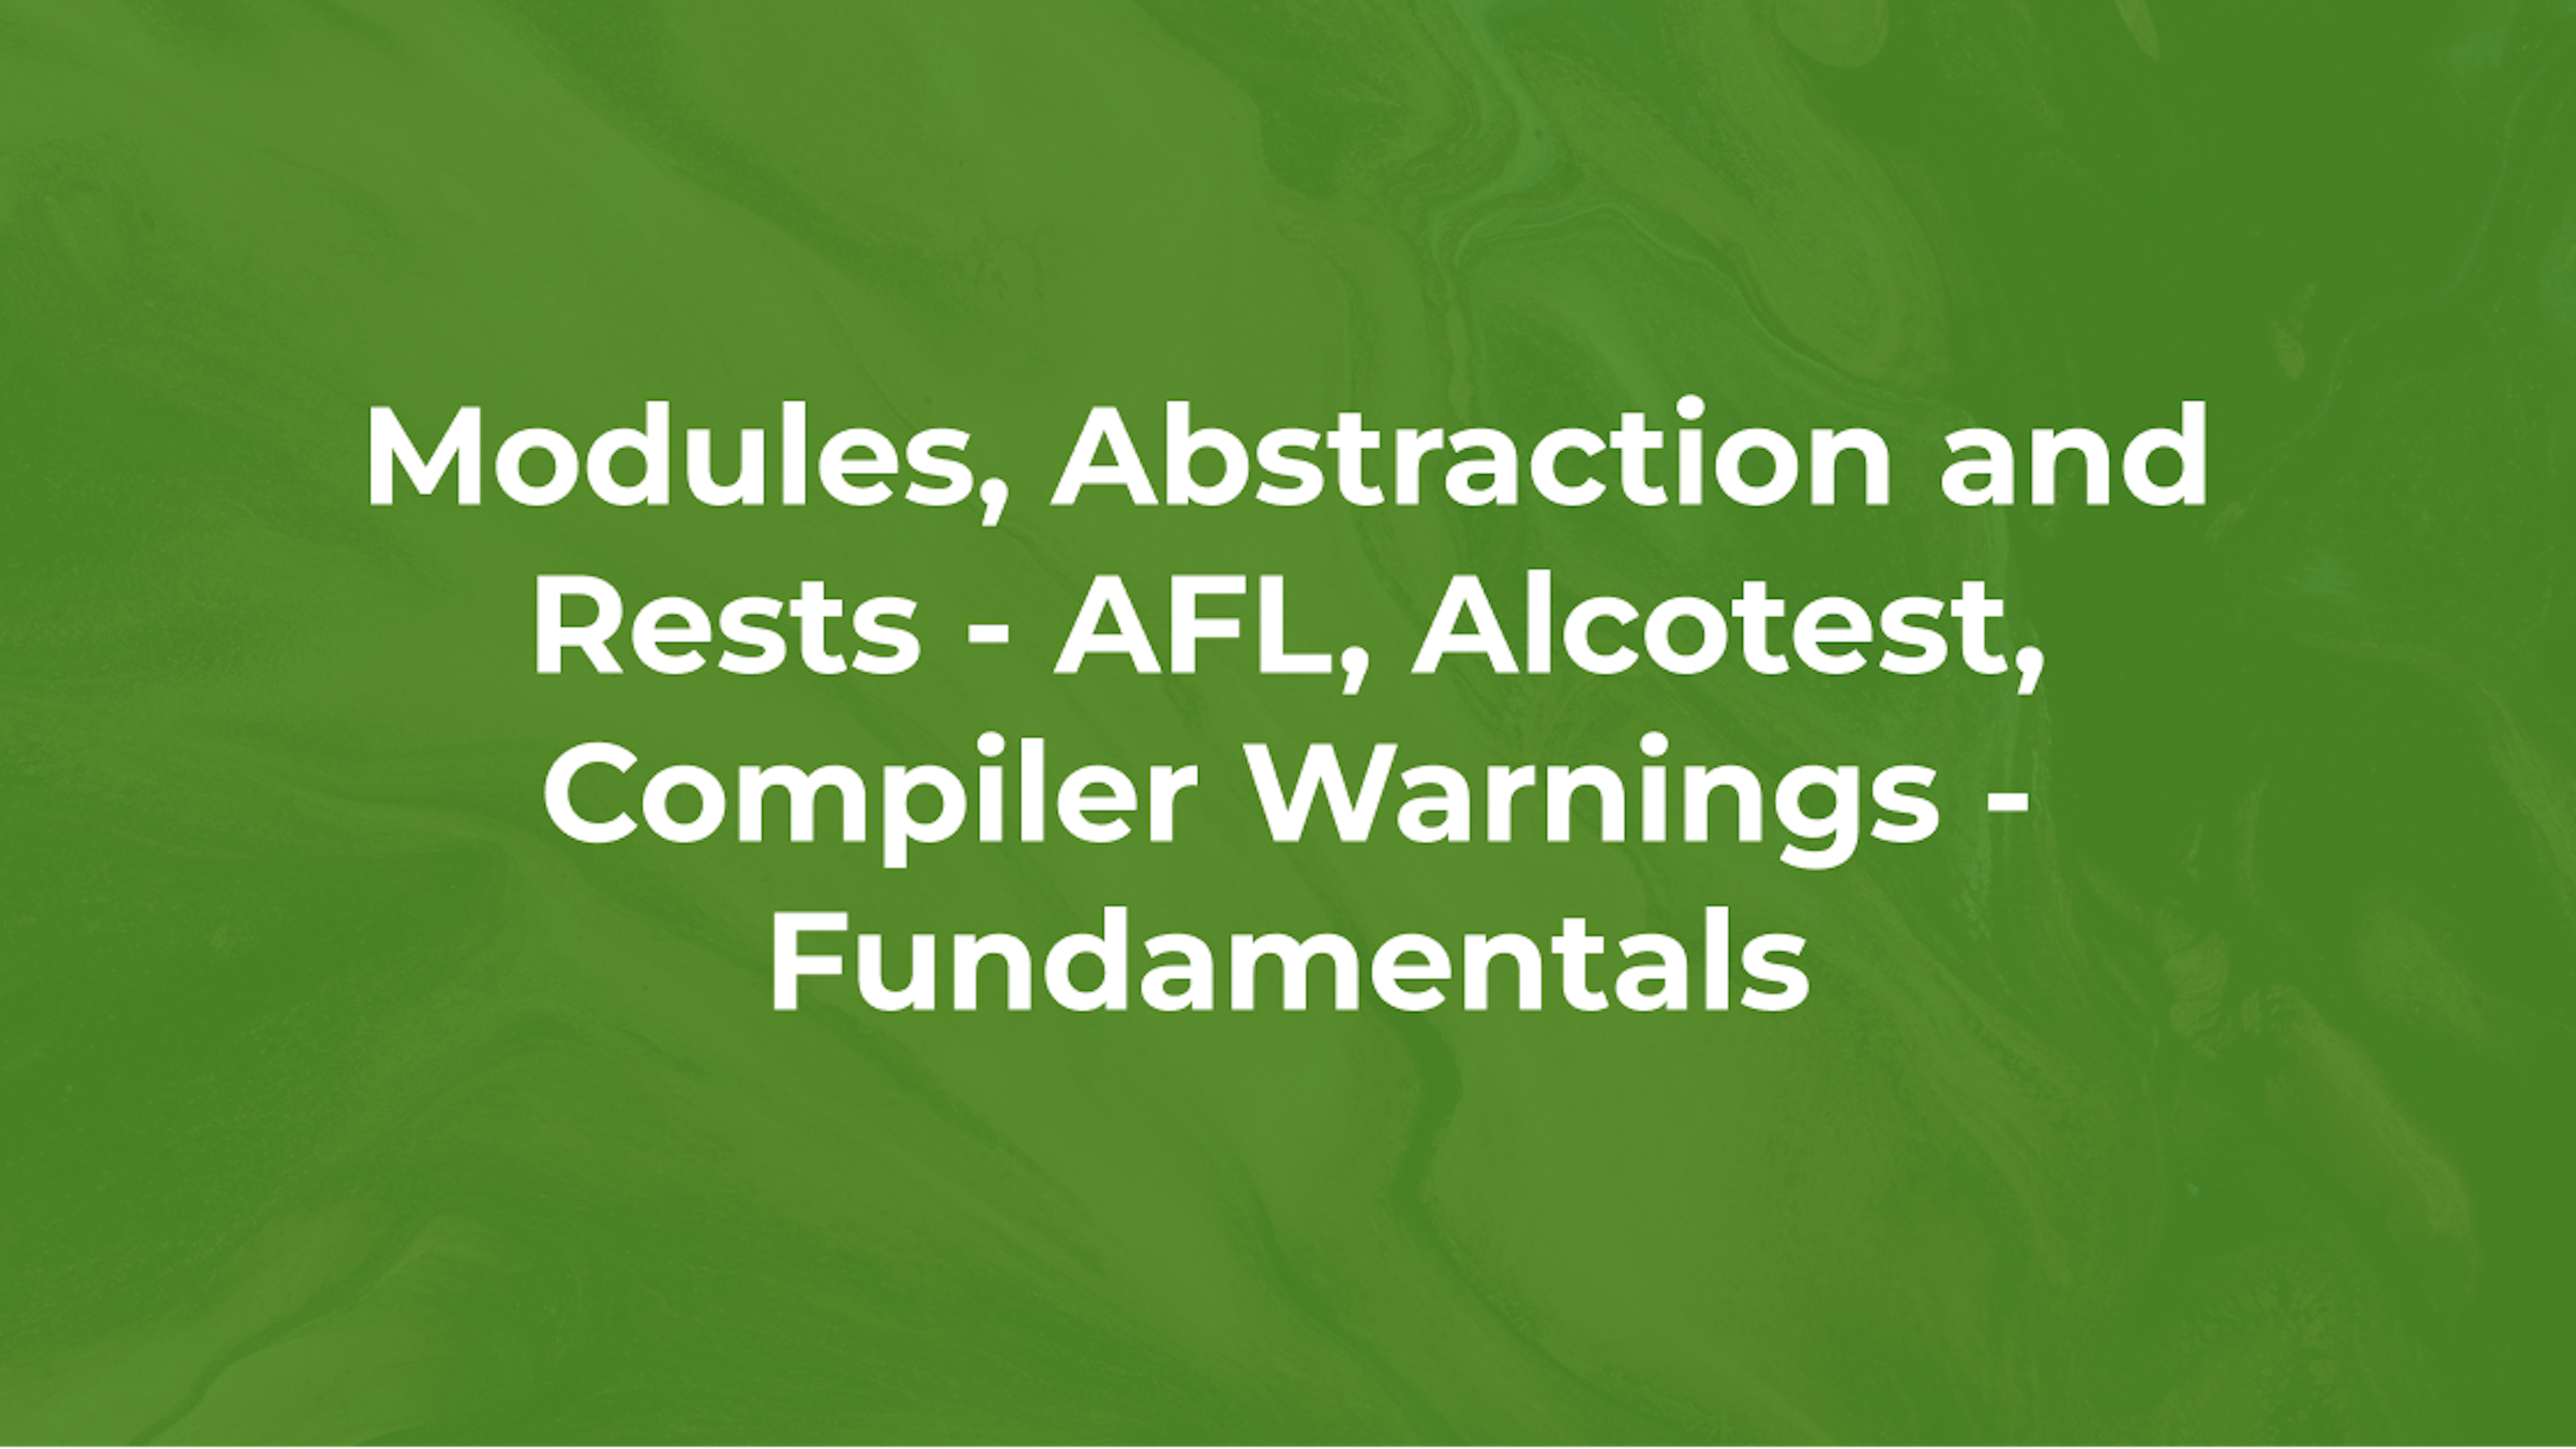 Modules, abstraction and tests - afl, alcotest, Compiler warnings - Fundamentals